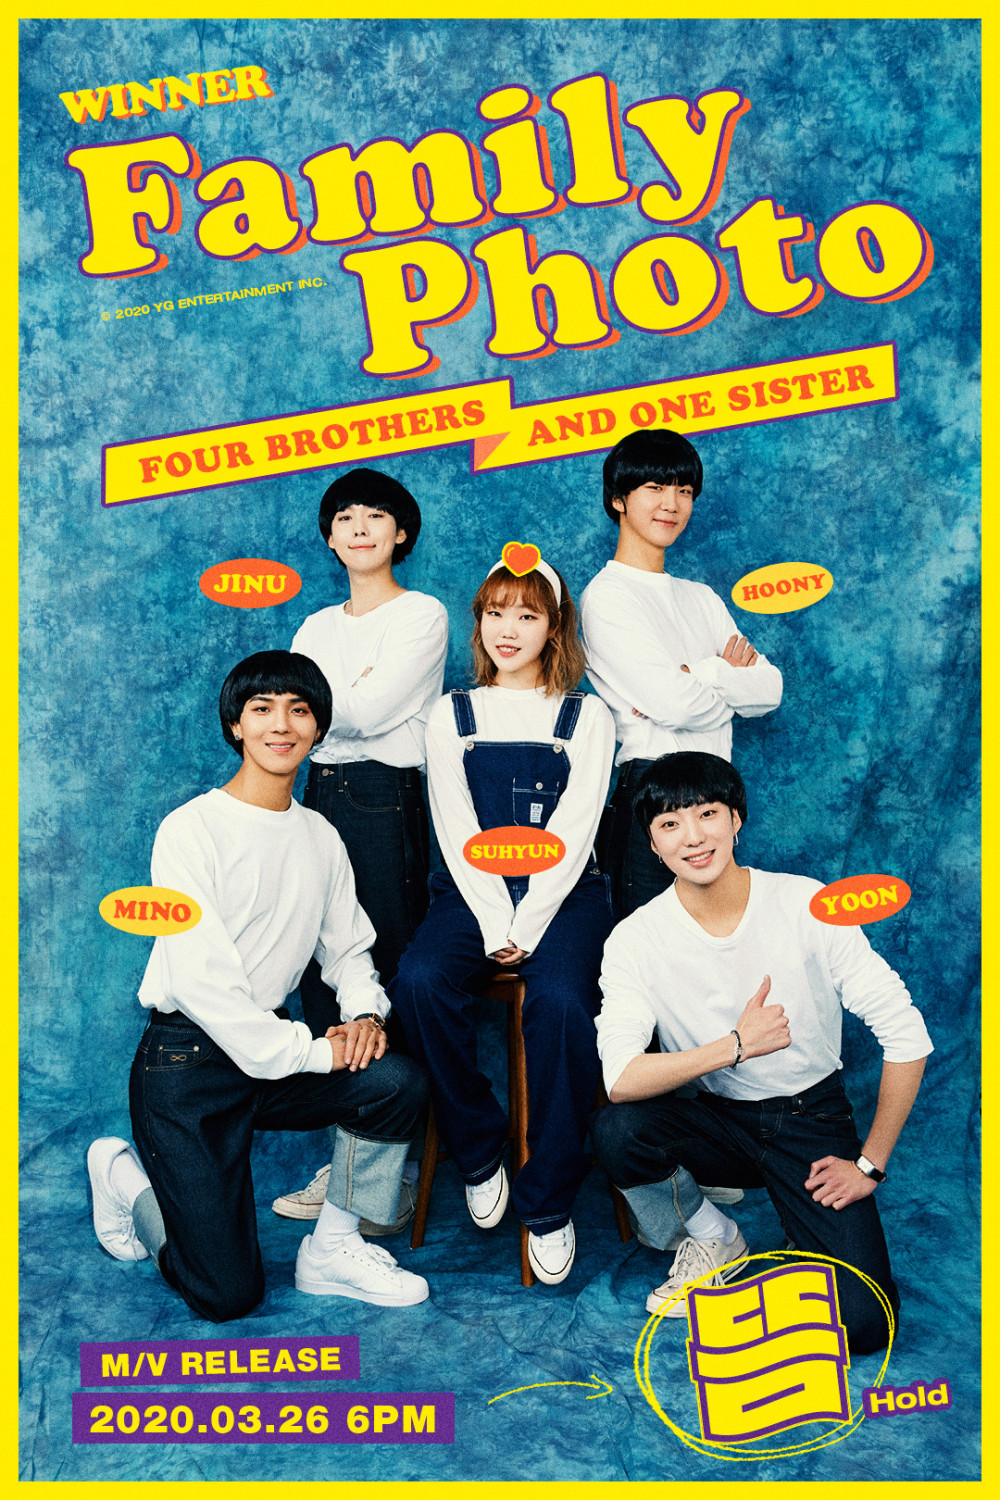 winner-adopt-akmu-suhyun-as-their-little-sister-in-newest-family-photo-teaser-1